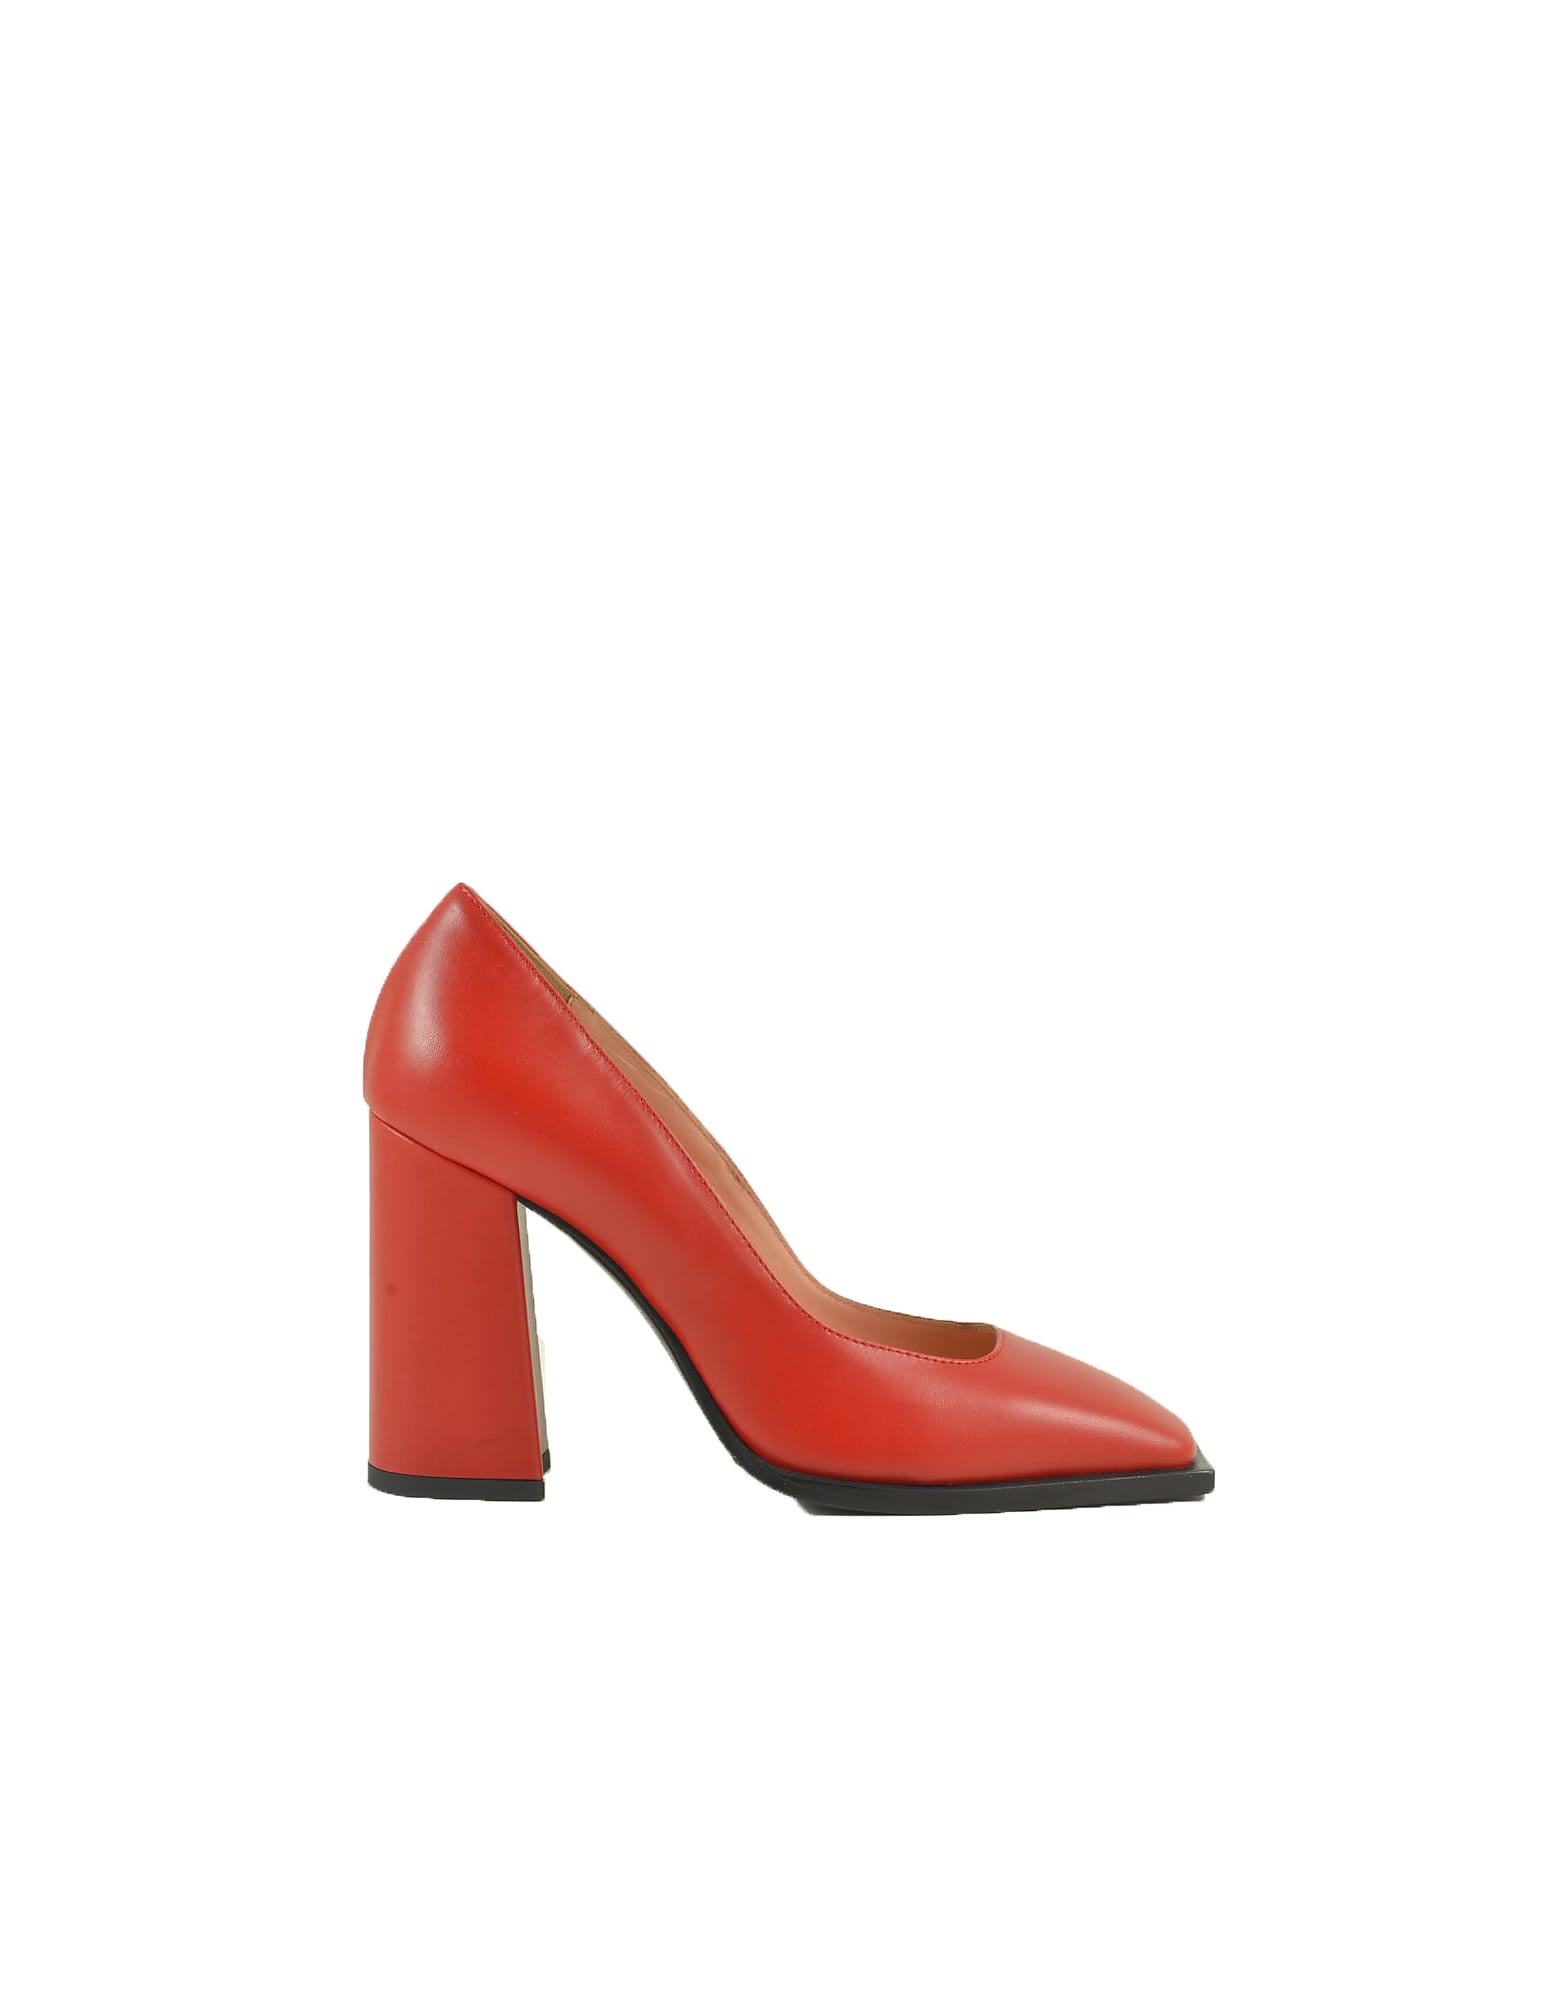 Msgm Red & Black Leather Convertible Pumps